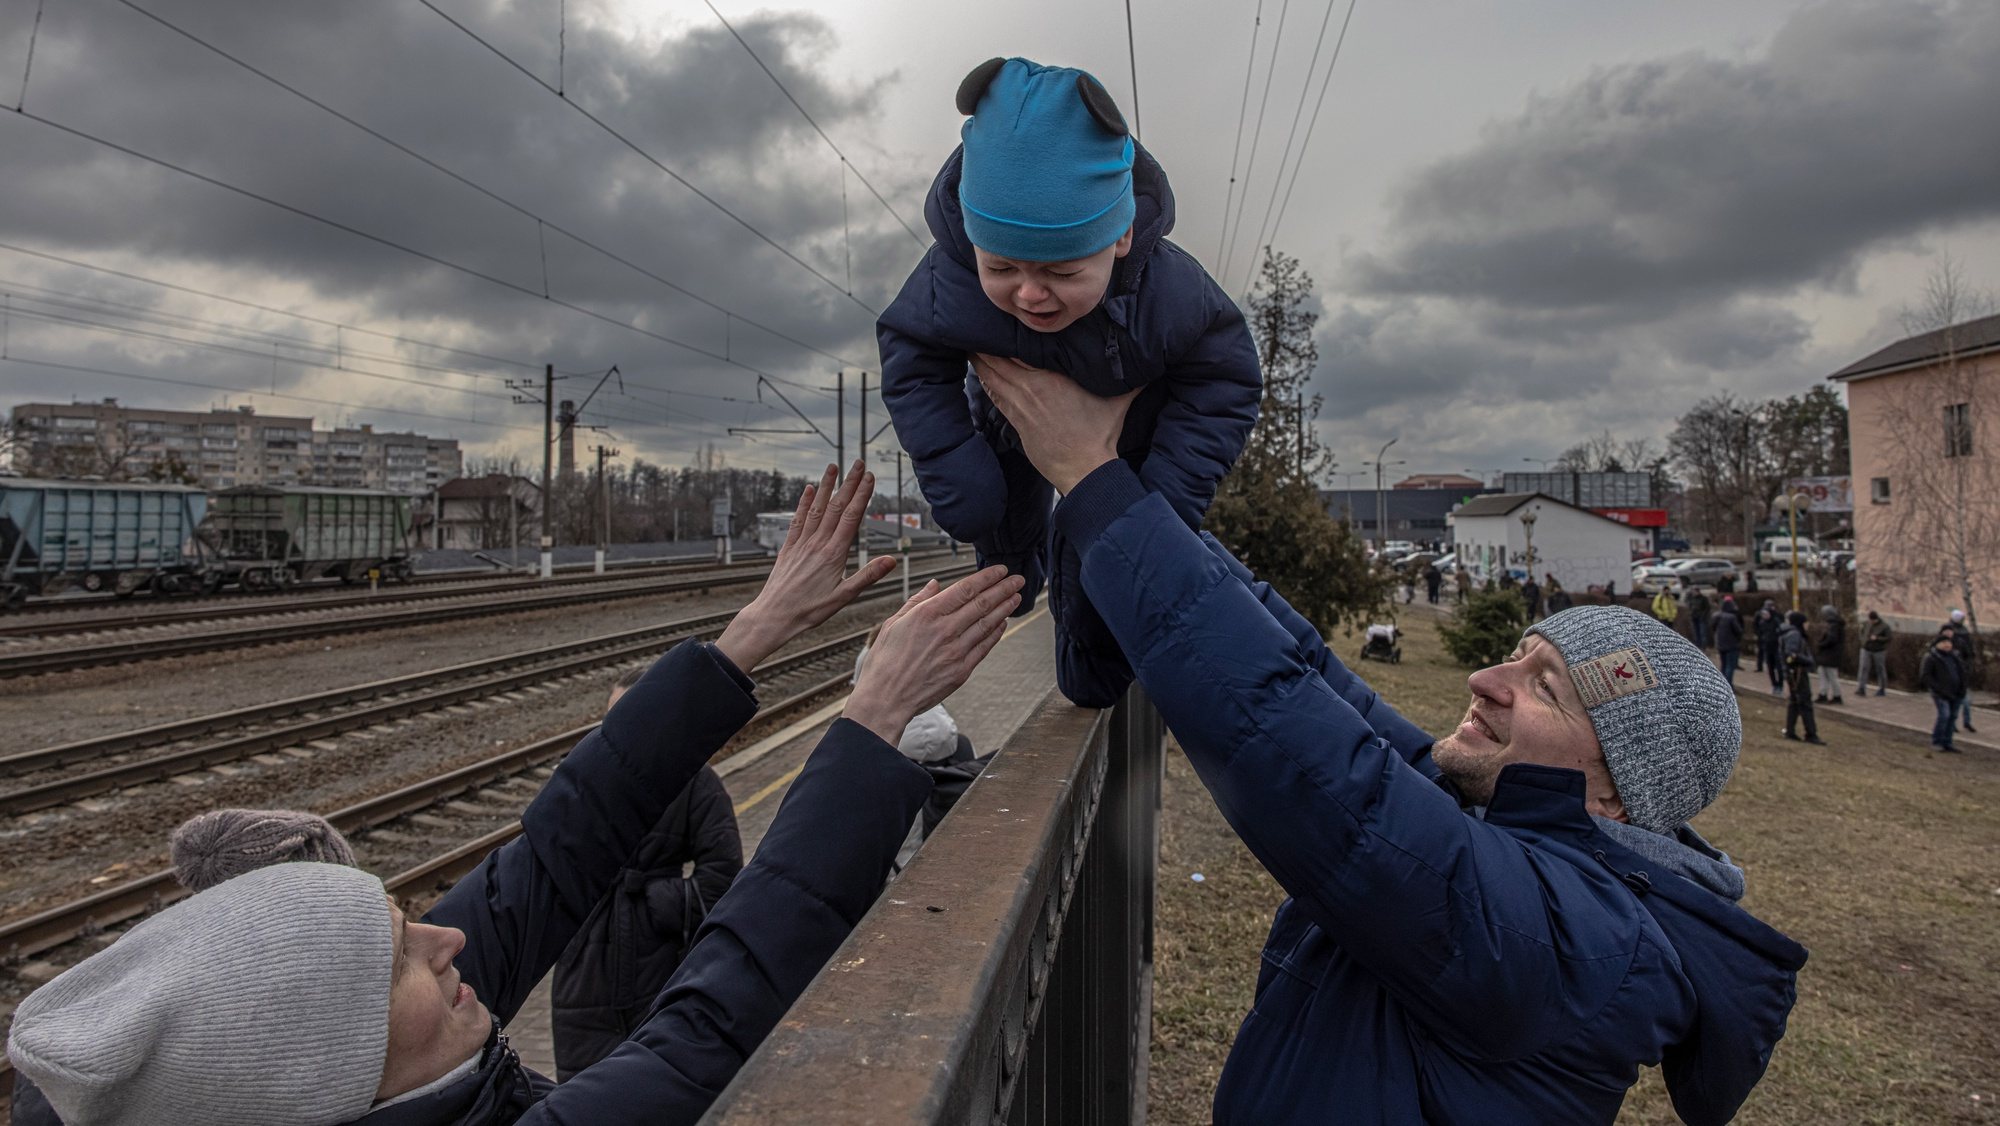 epa10364873 Oleg (R), who decided to stay in Irpin, passes his son Maksim over a fence to his wife, Yana, before the arrival of an evacuation train to the city of Kiev (Kyiv), at the train station in Irpin, Ukraine, 04 March 2022. People, mostly women and children, fled the frontline towns of Bucha and Irpin after heavy fighting broke out between Ukrainian and Russian forces in recent days.  EPA/ROMAN PILIPEY